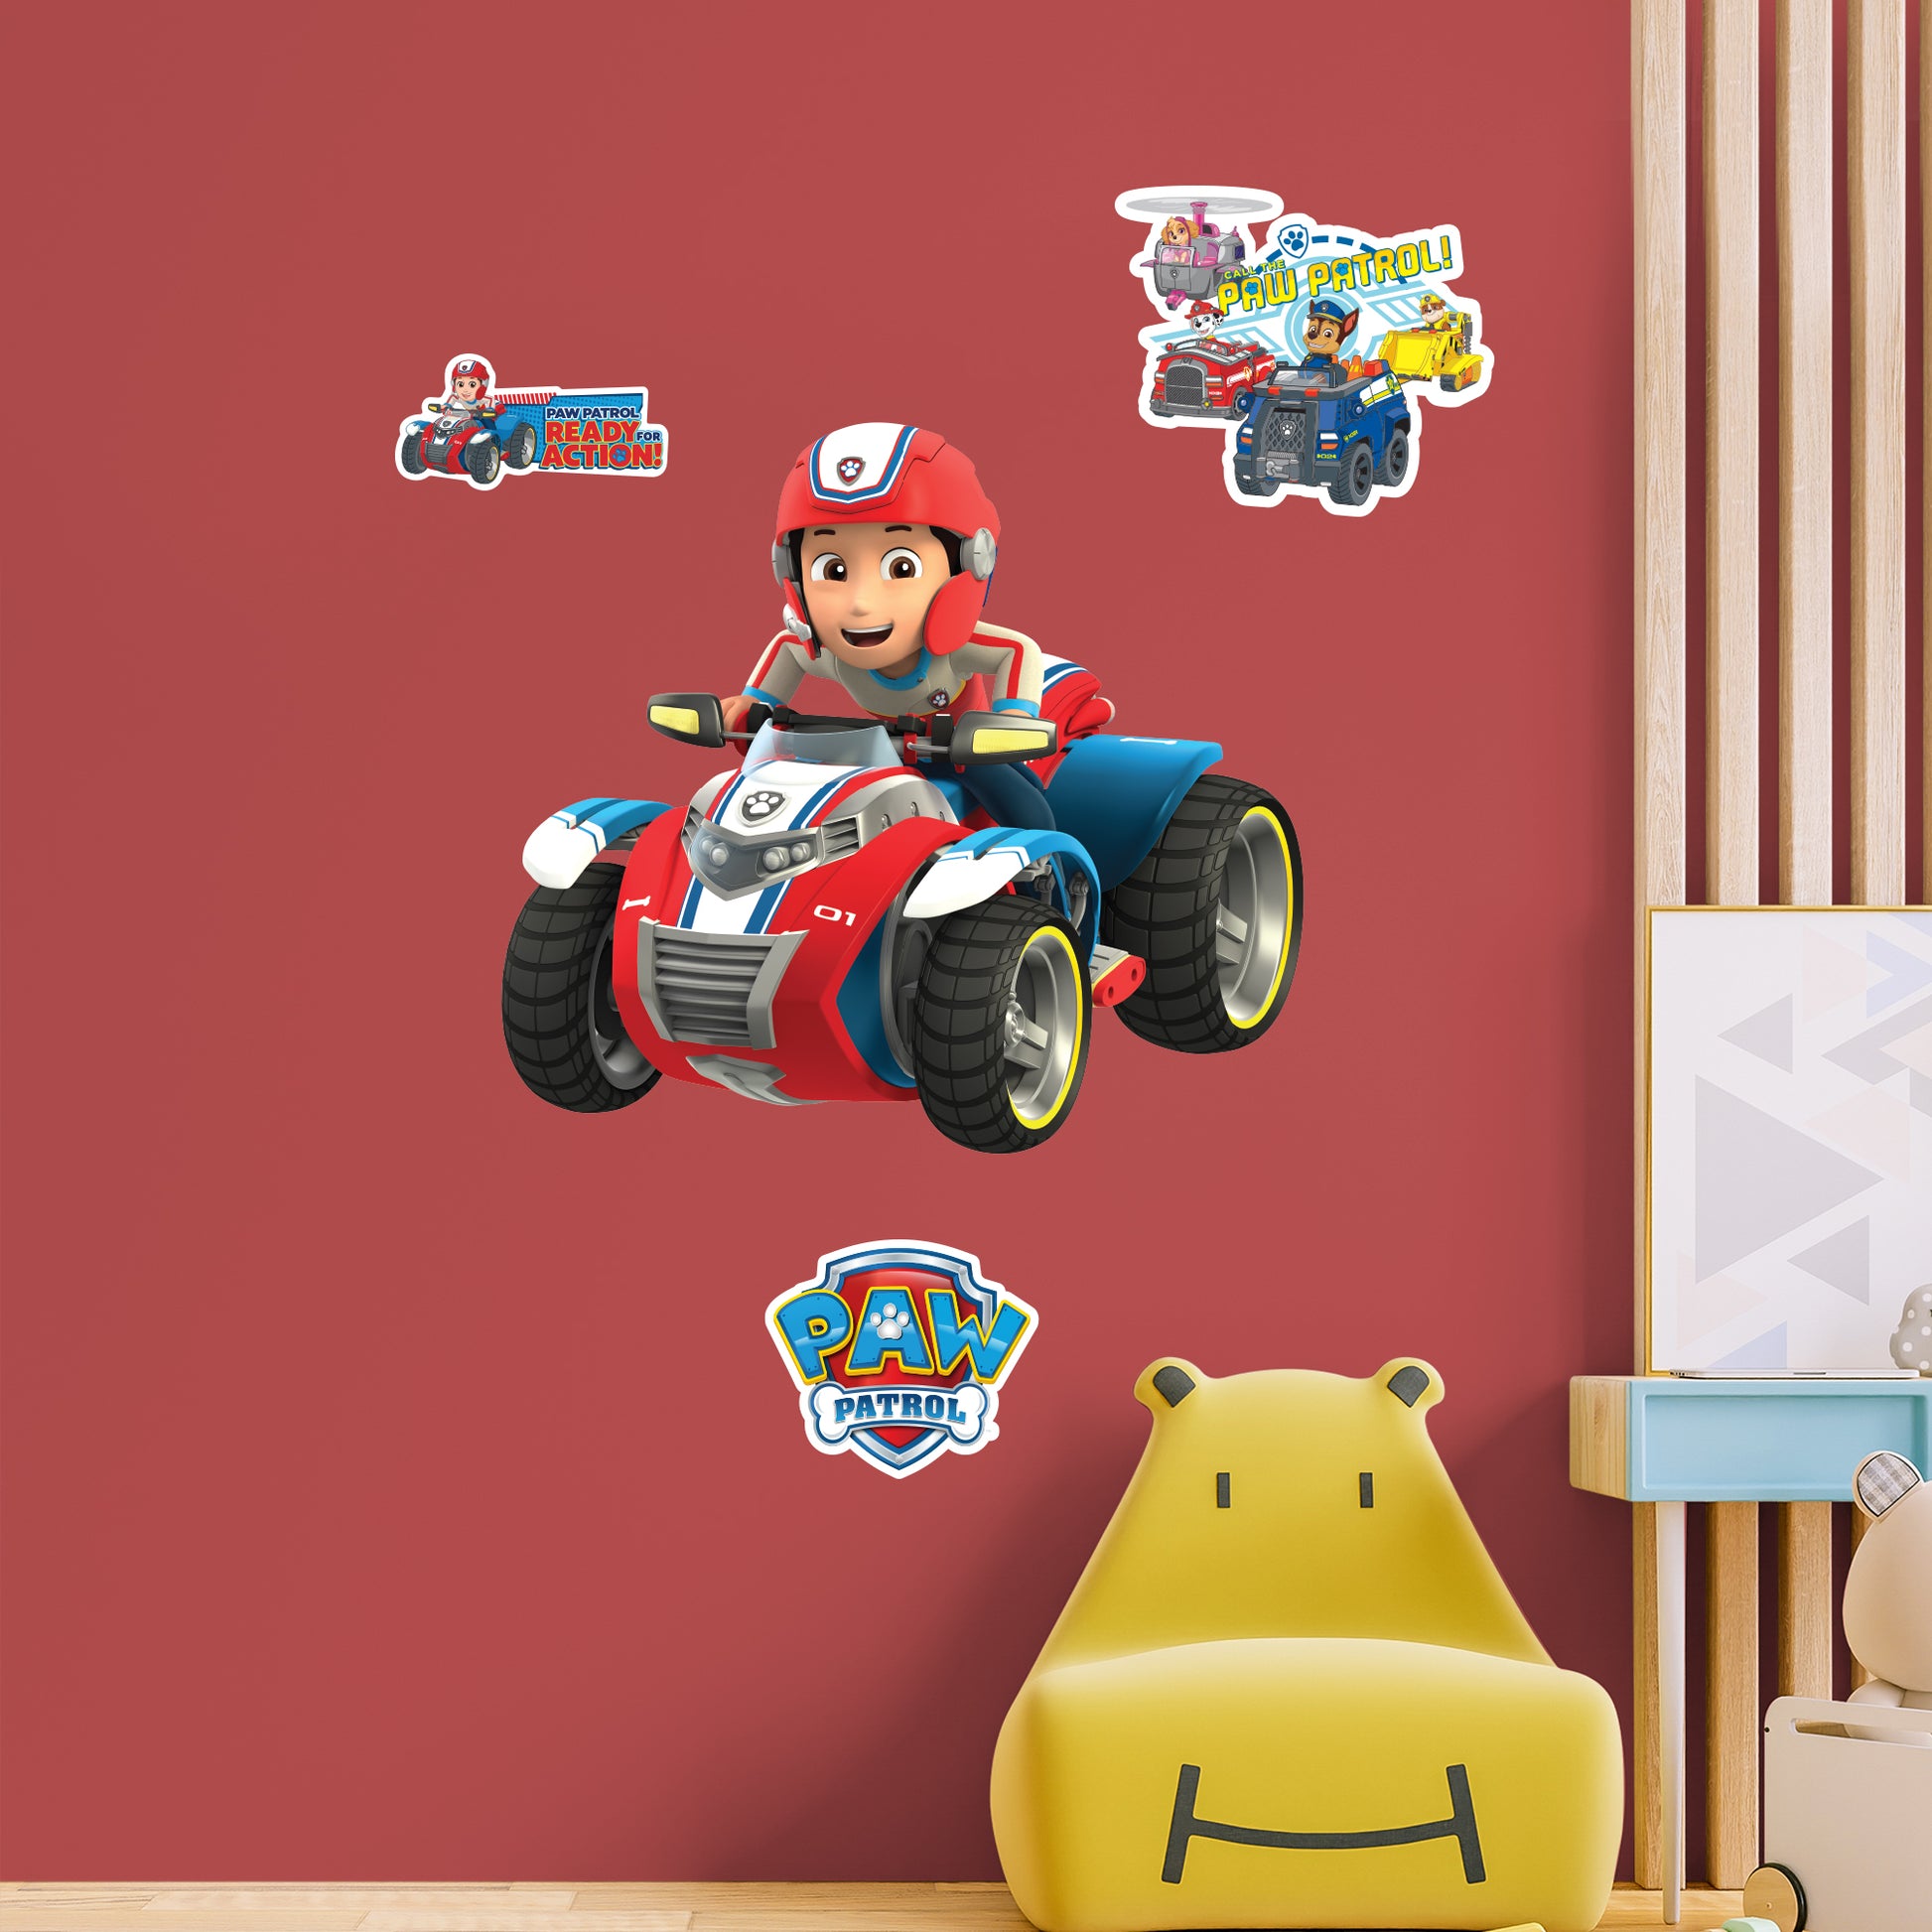 Giant Character +3 Decals  (26"W x 29"H) 